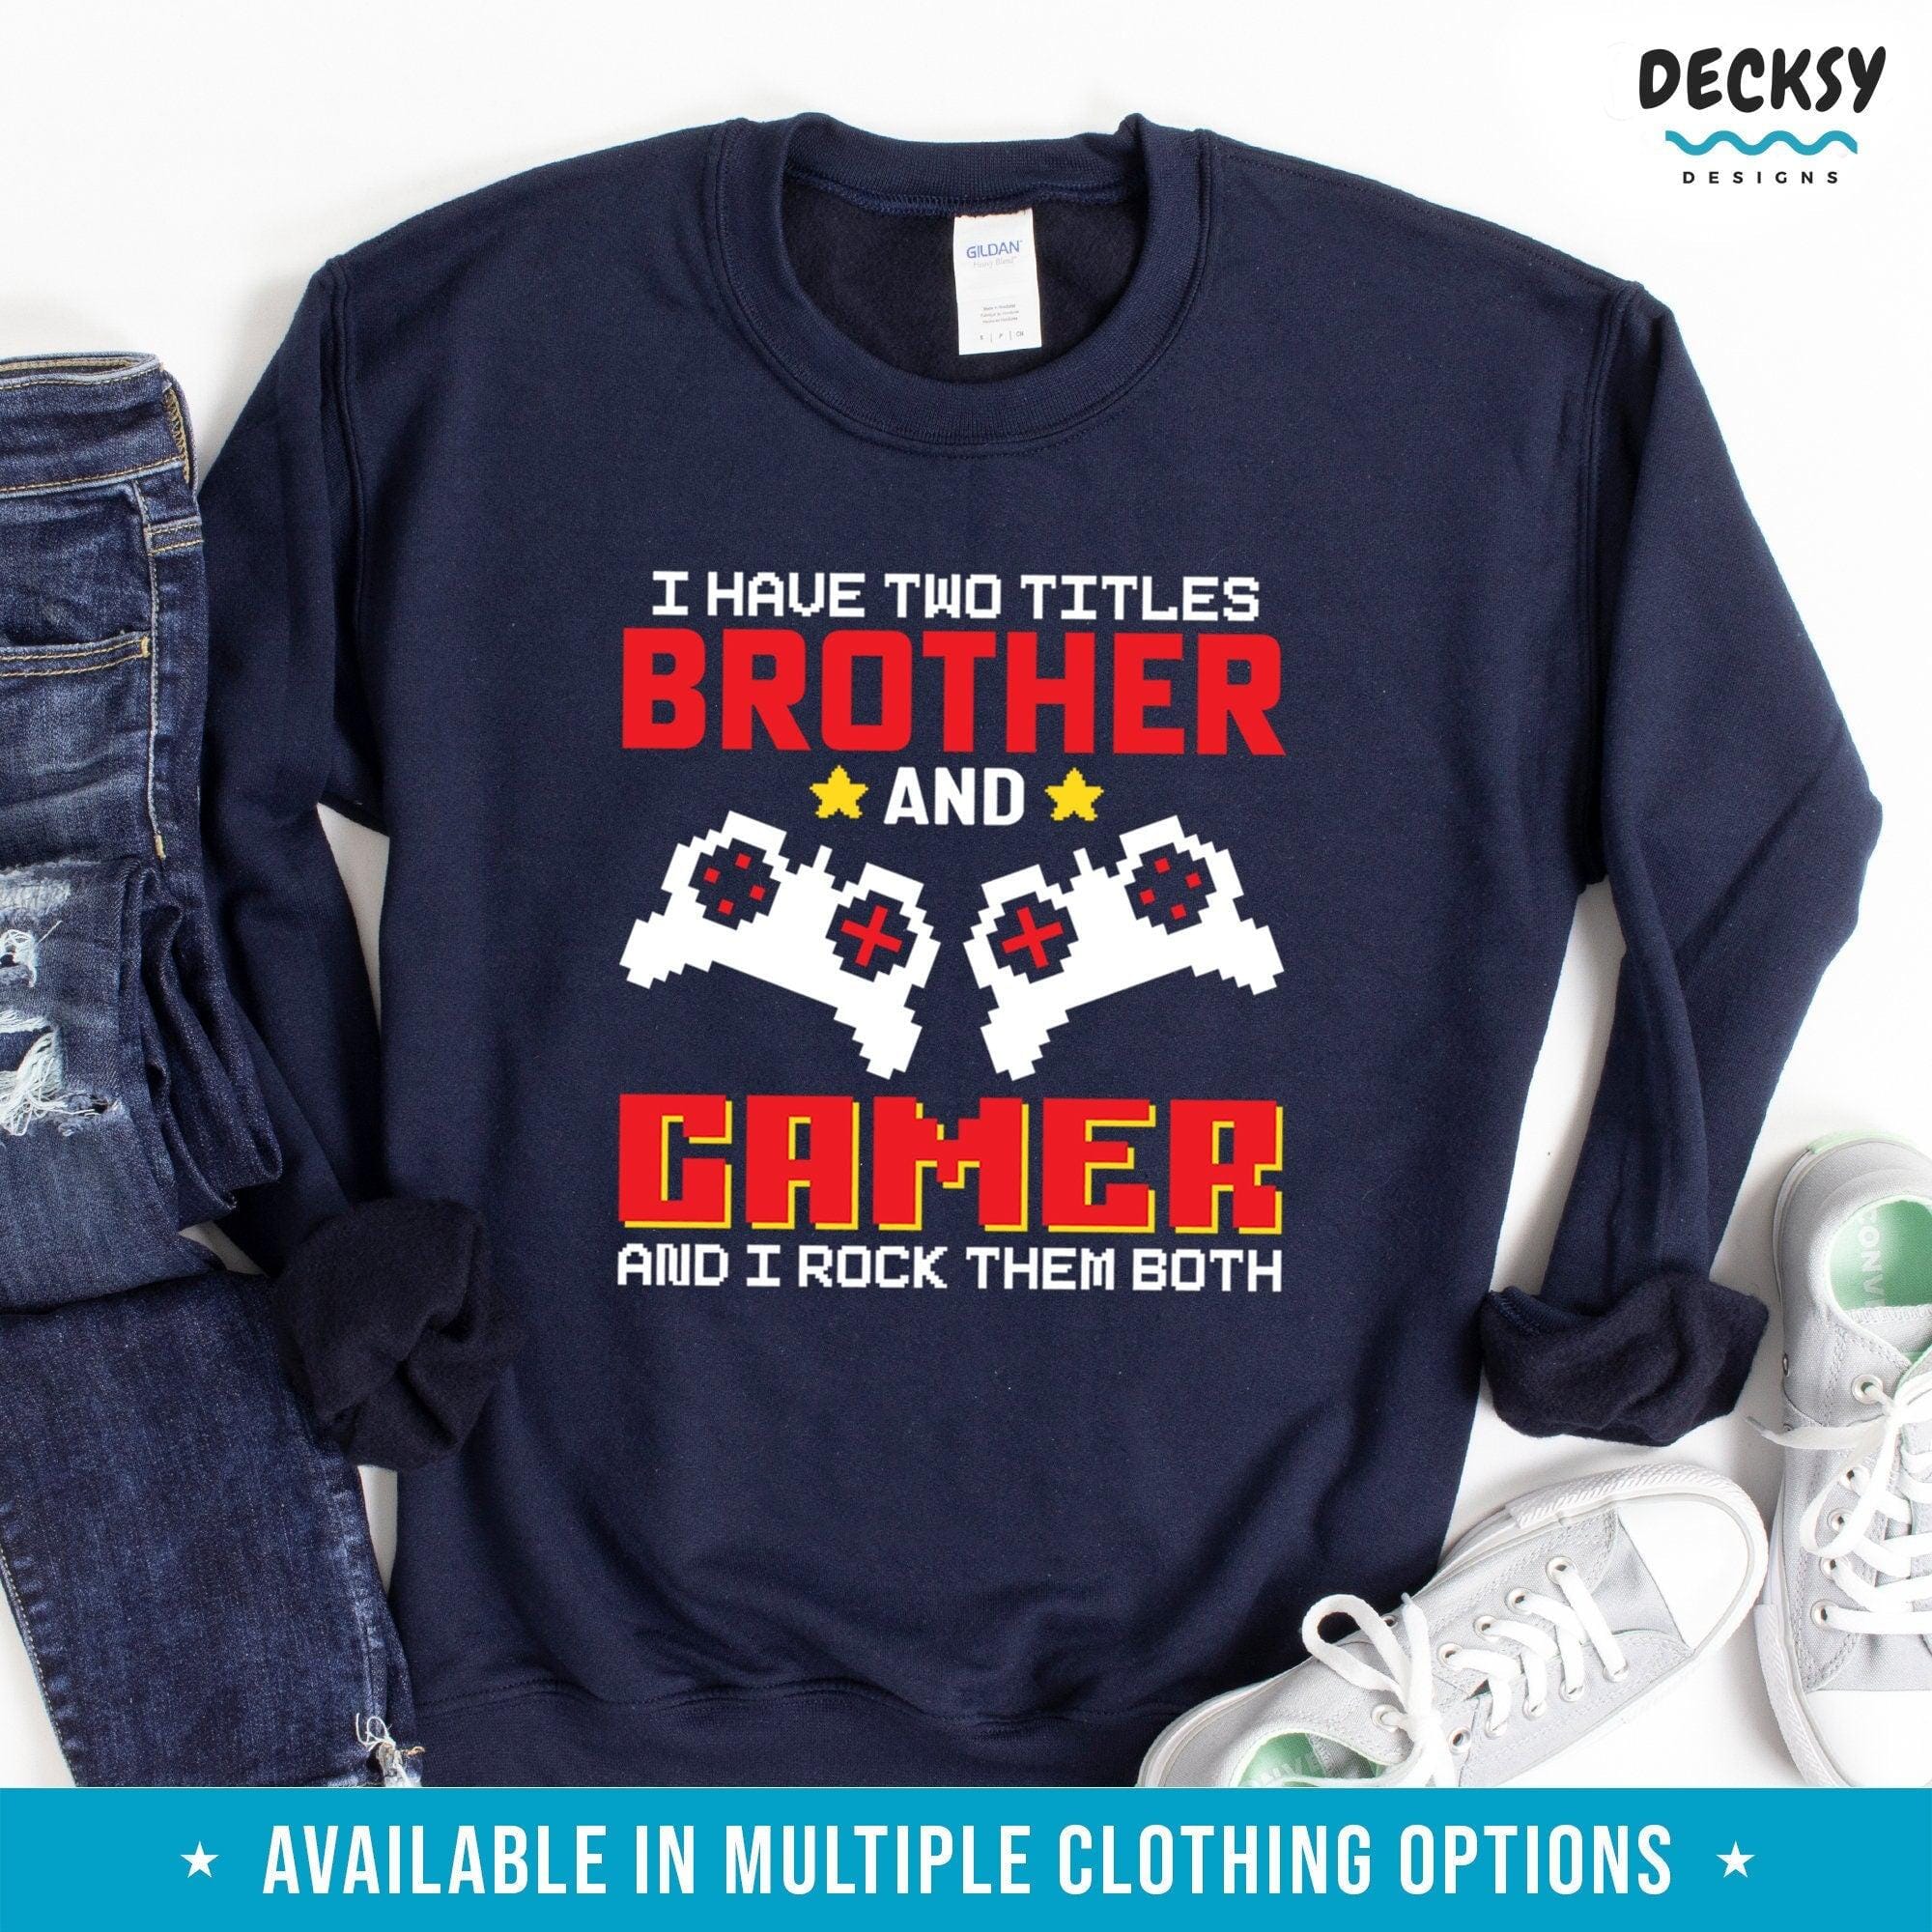 Gaming Shirt, Big Brother Gift-Clothing:Gender-Neutral Adult Clothing:Tops & Tees:T-shirts:Graphic Tees-DecksyDesigns